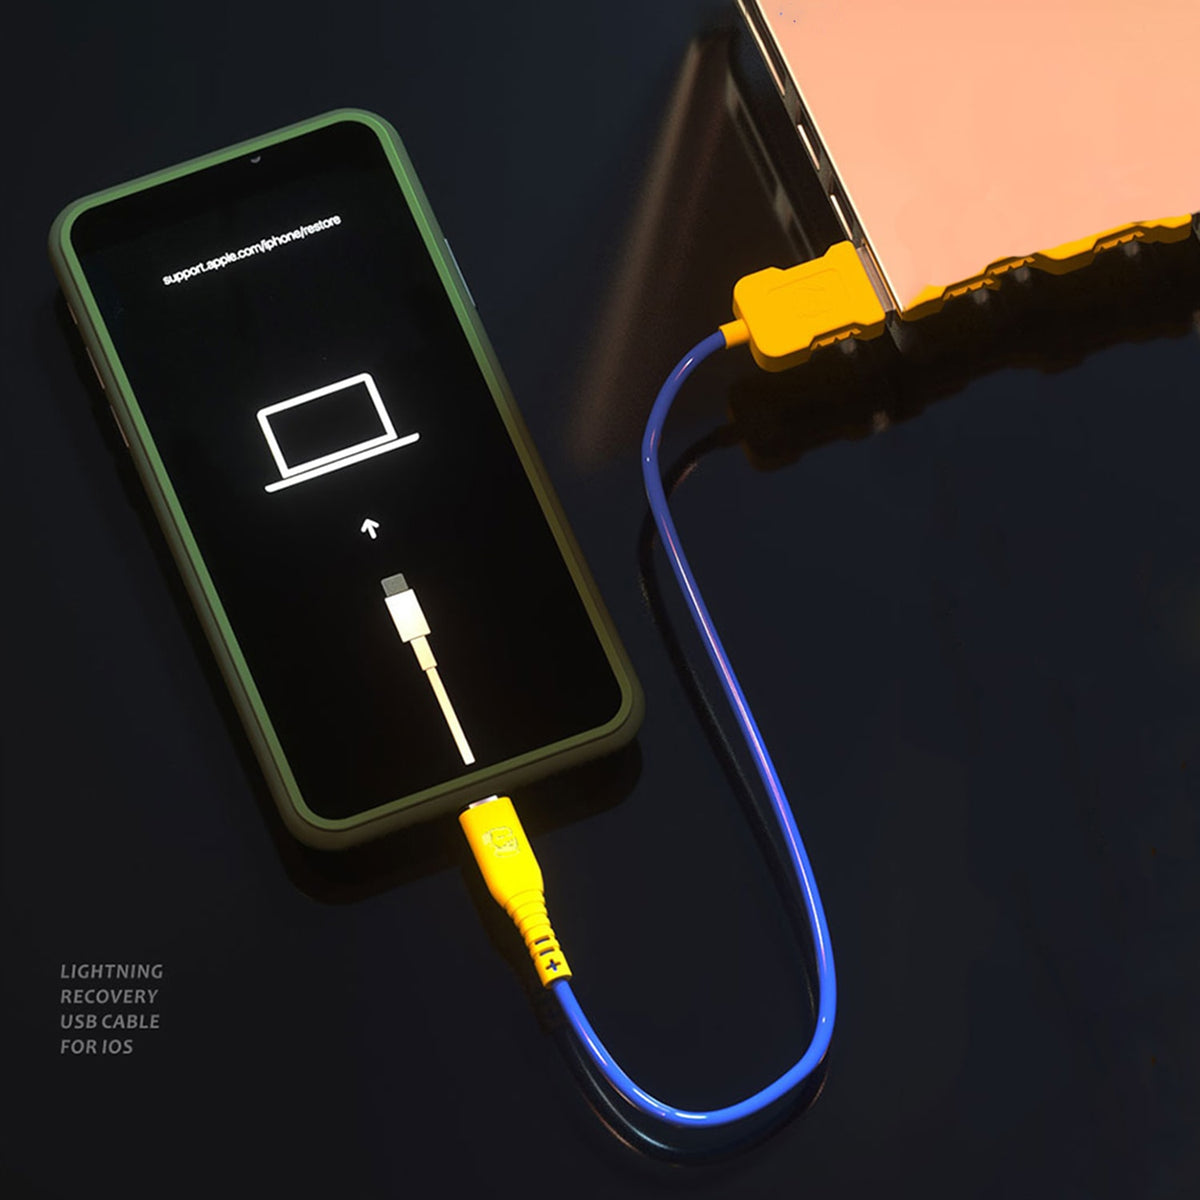 MECHANIC IDATE LIGHTNING RECOVERY USB CABLE FOR IOS